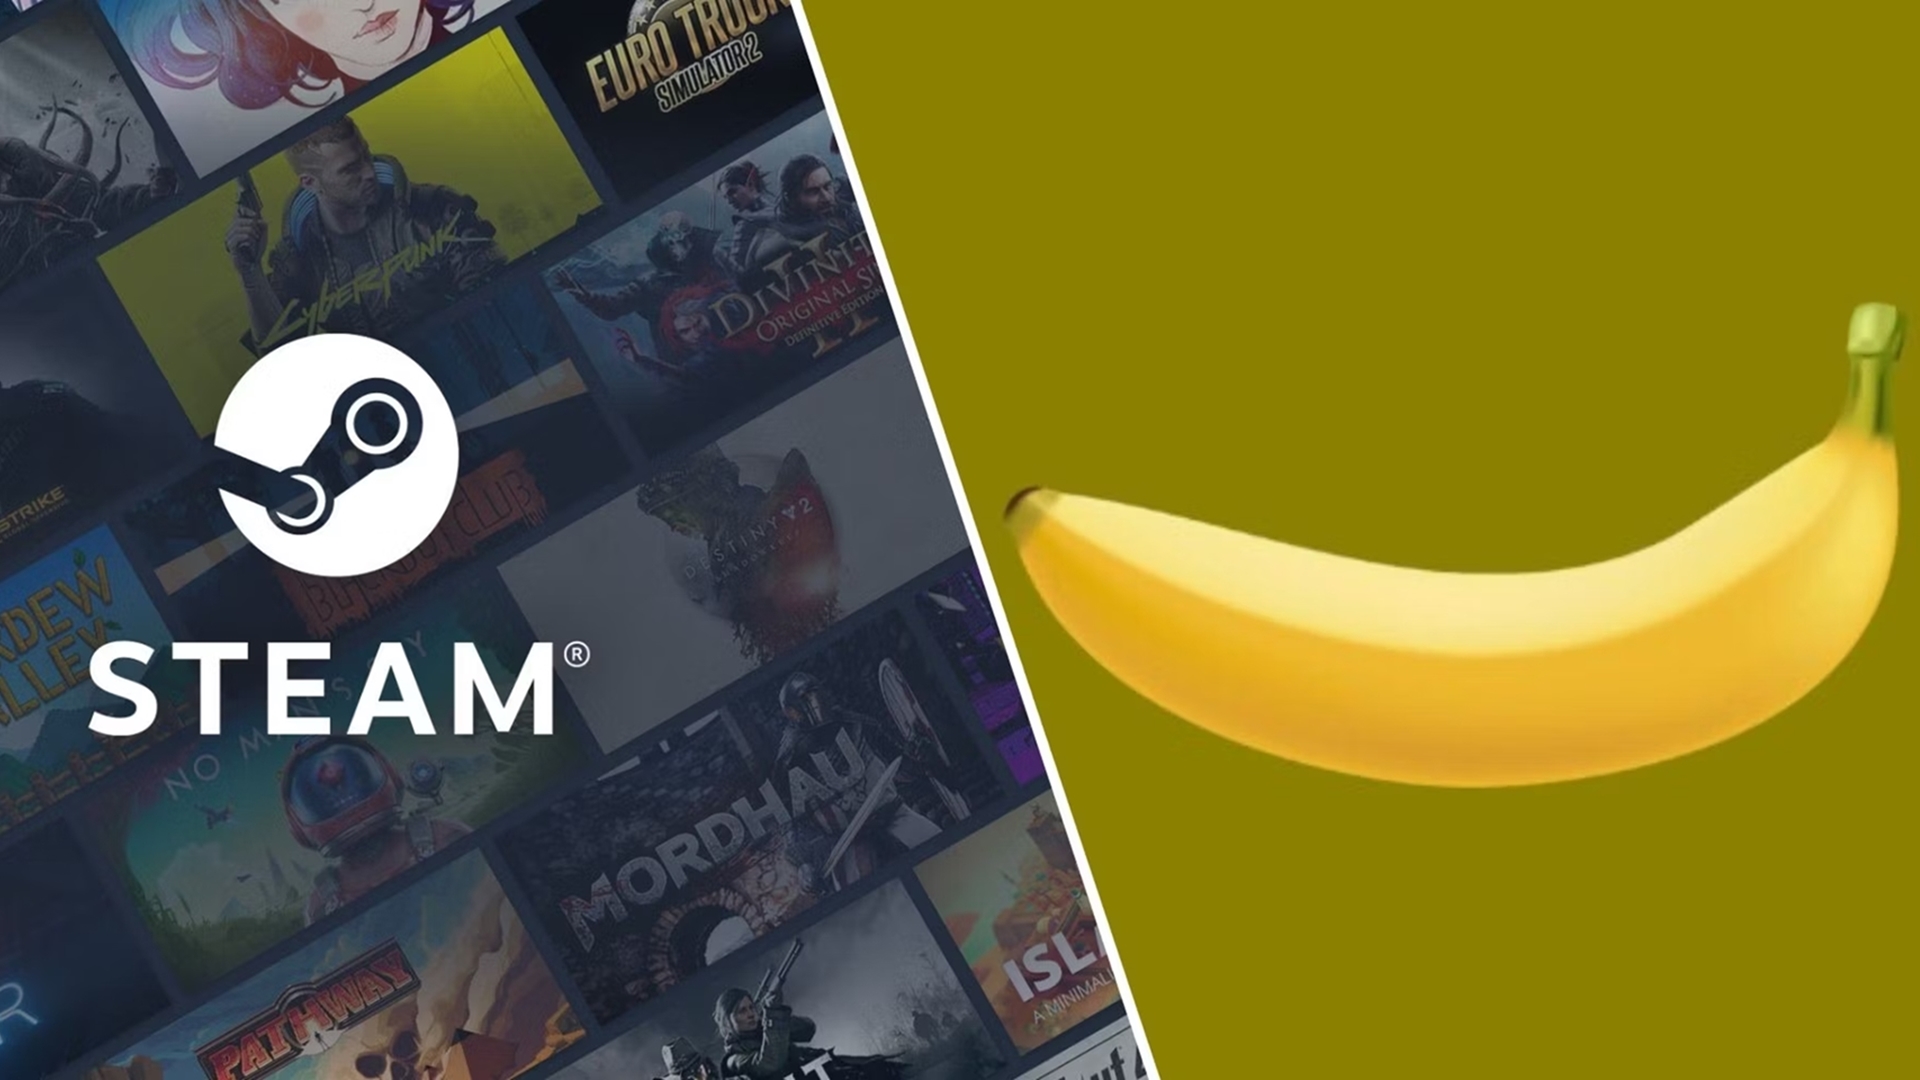 Banana is available to play for free on Steam.